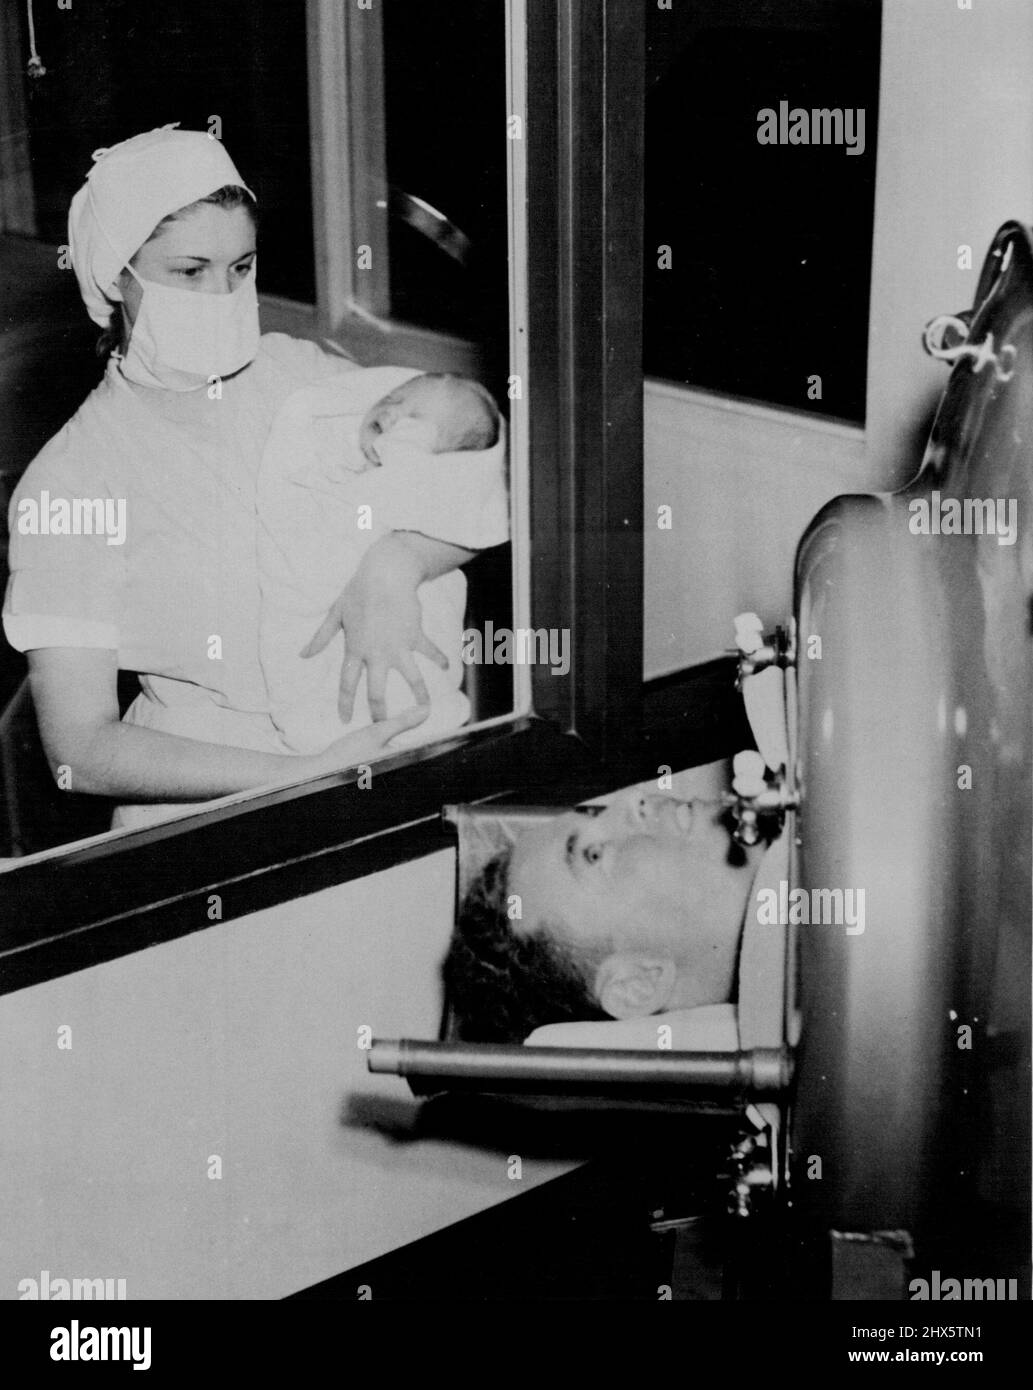 Snite Sees Baby Daughter For First Time - Fred Snite Jr., who has lived in an 'Iron Lung' for the past four years, gets his first view of the 8½ pound daughter born to his wife, as his portable 'Lung' was wheeled to the window of the hospital nursery. September 25, 1940. (Photo by Acme). Stock Photo